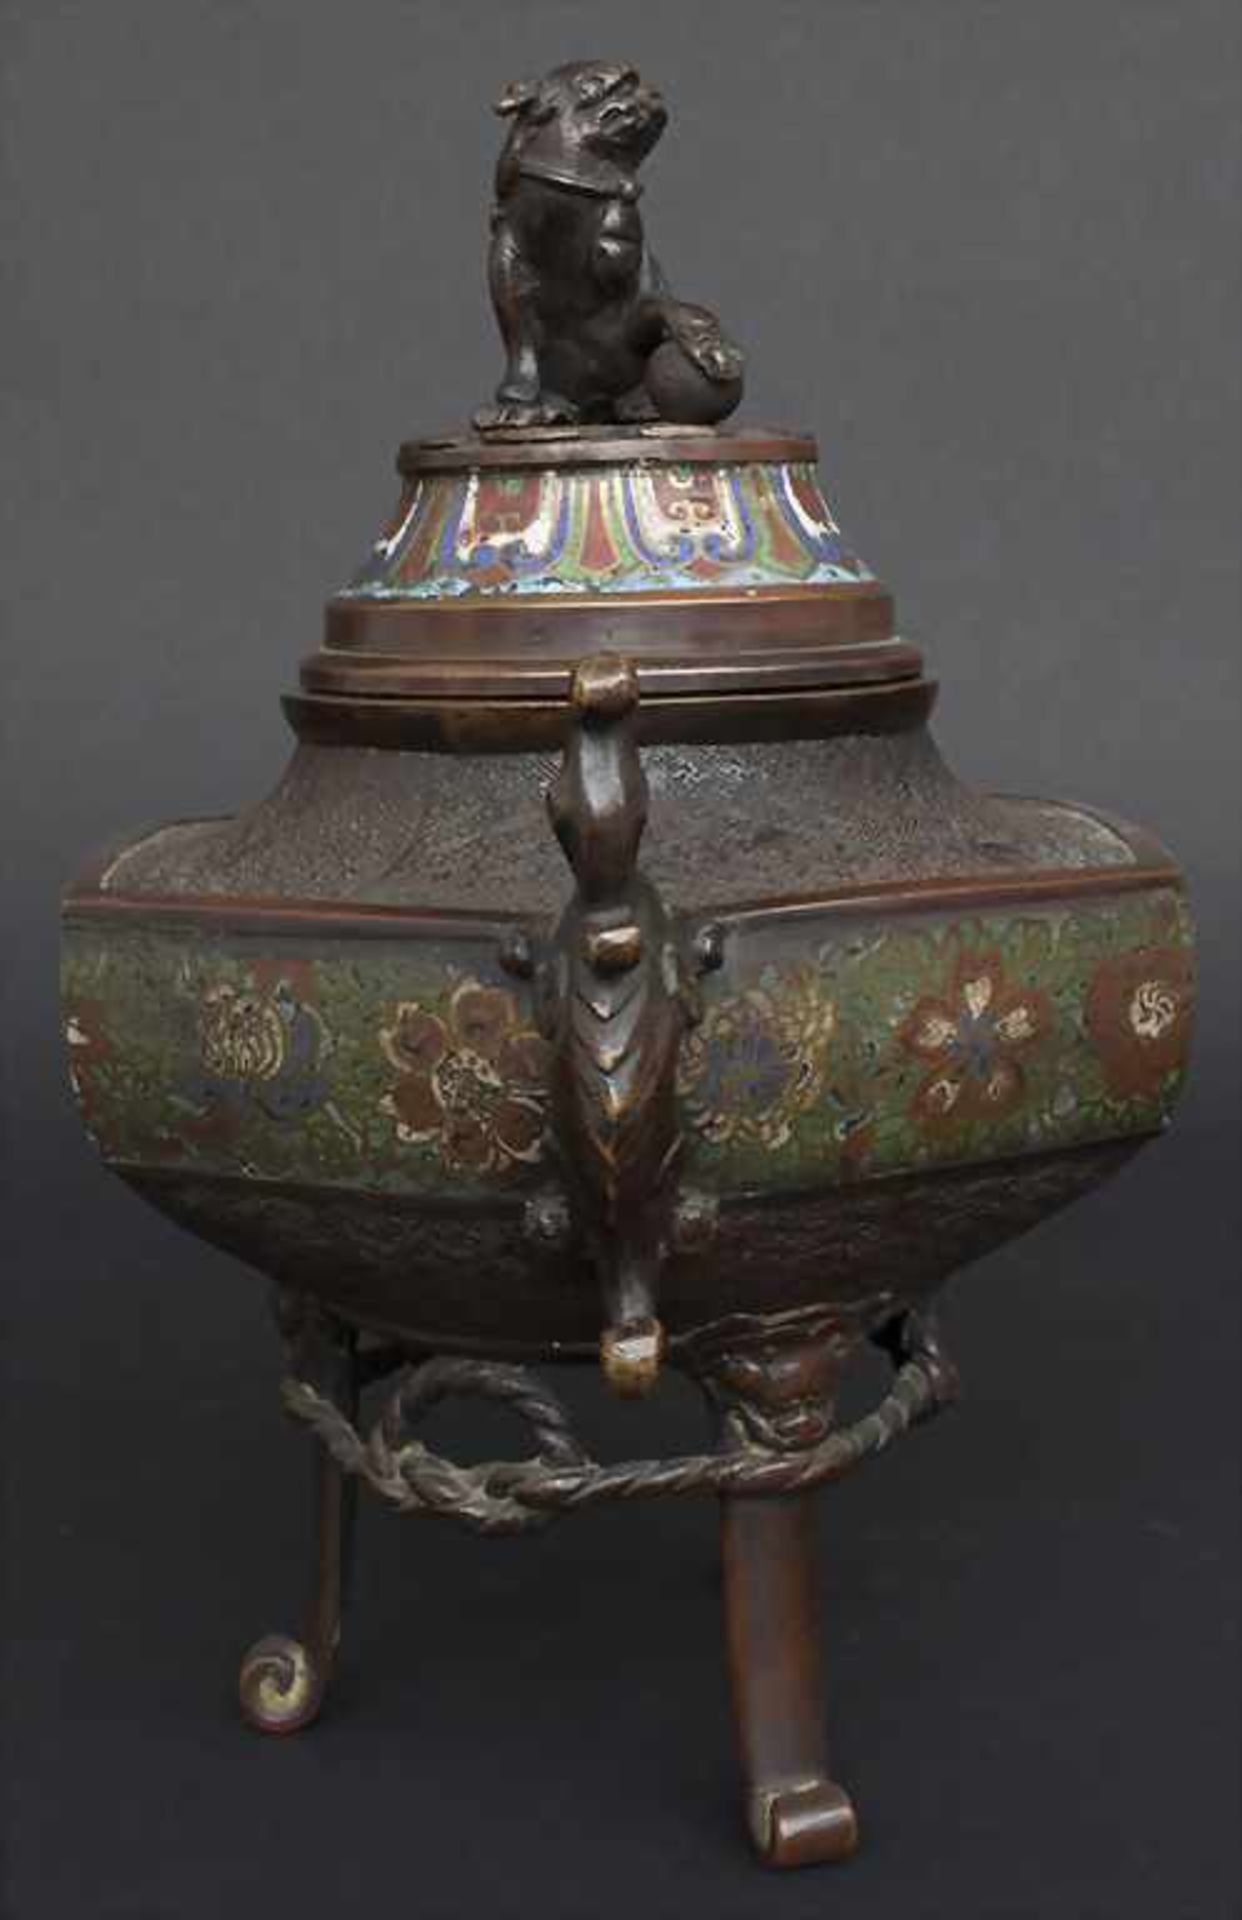 Cloisonné Weihrauchbrenner mit Shishi / A Cloisonné incense burner with Shishi, China, 19. Jh. - Image 2 of 8